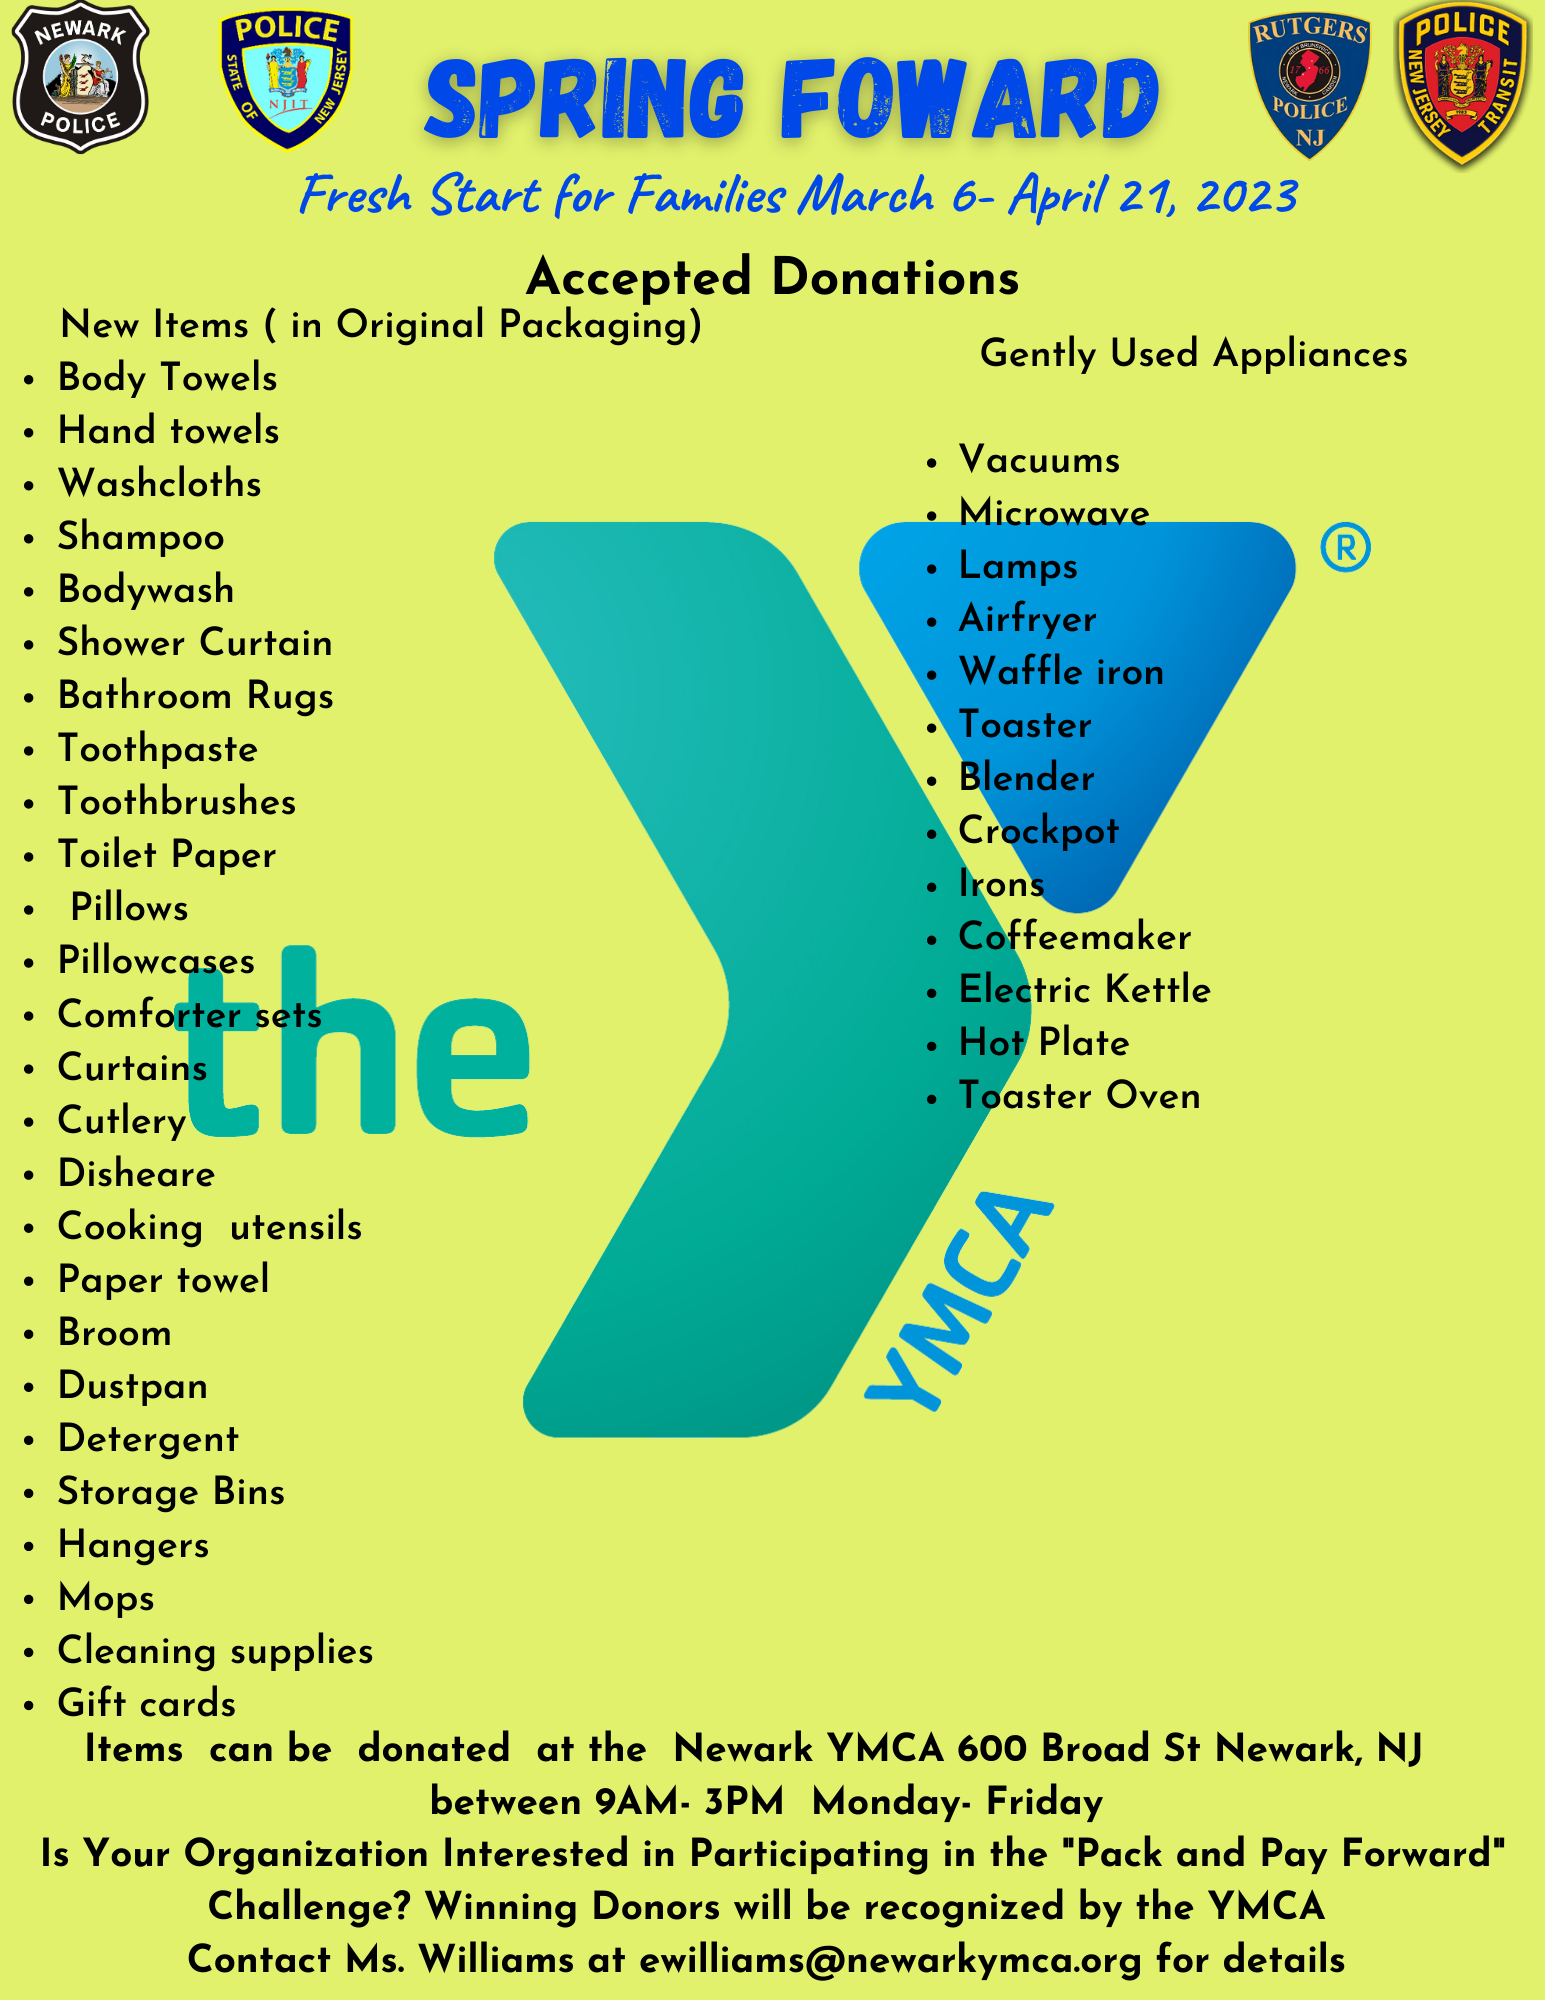 List of accepted donations for Newark YMCA Spring Forward Program